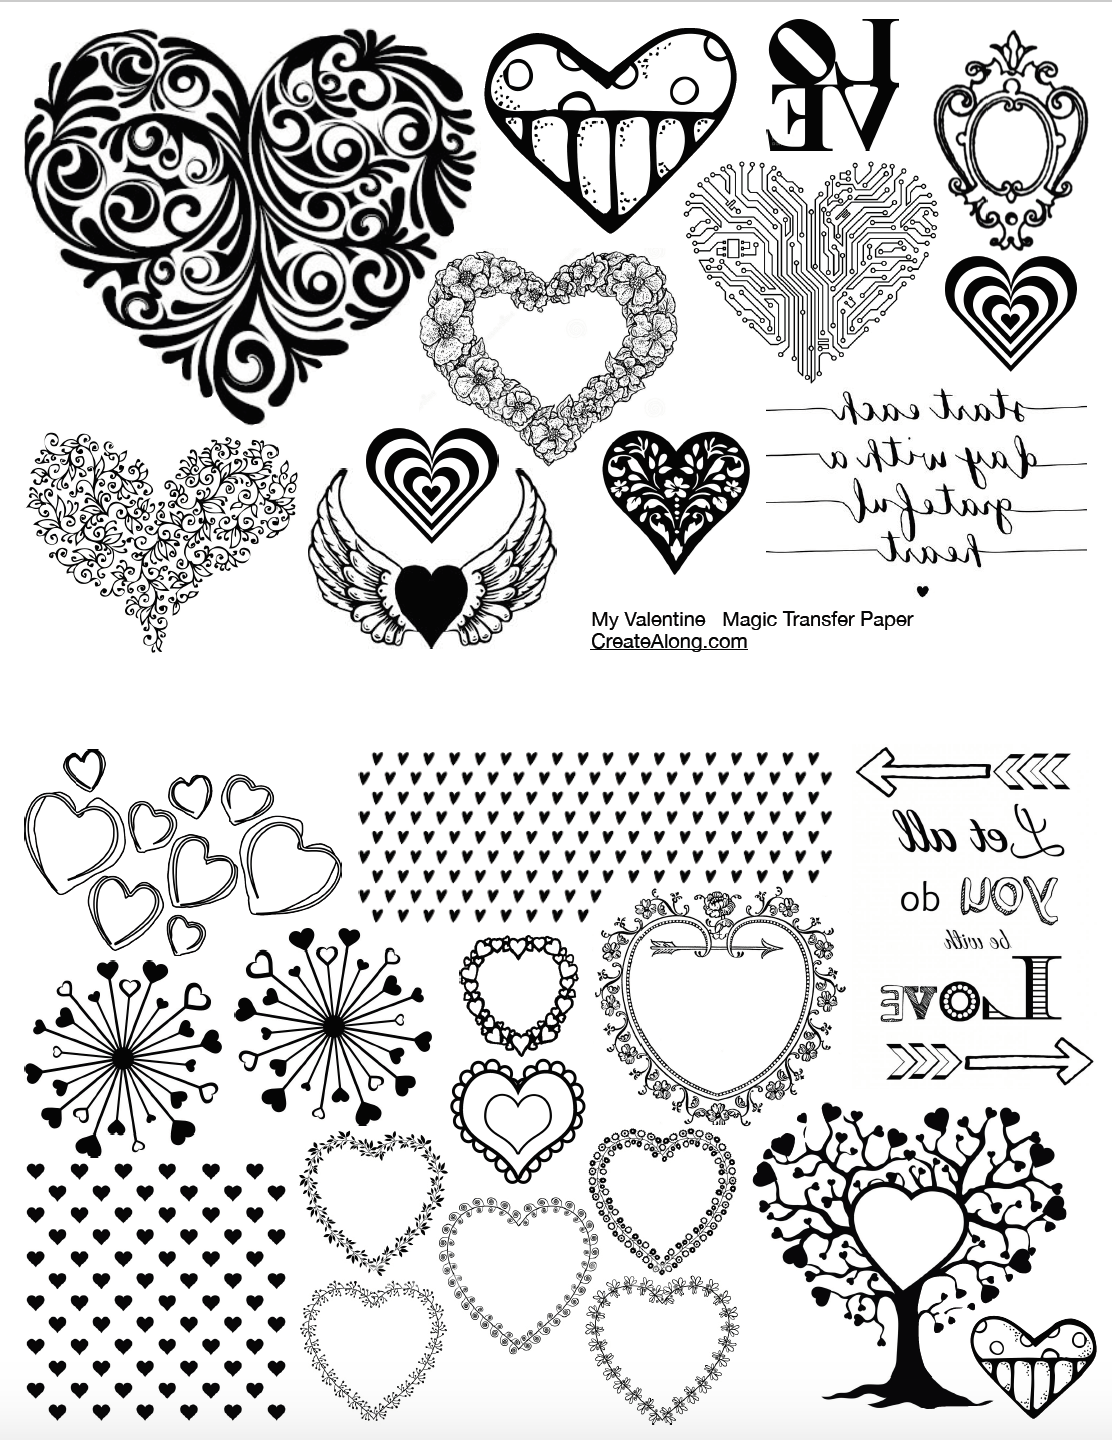 Digital Valentine Hearts Image Transfer PDF for creating images on raw polymer clay and for use with Magic Transfer Paper